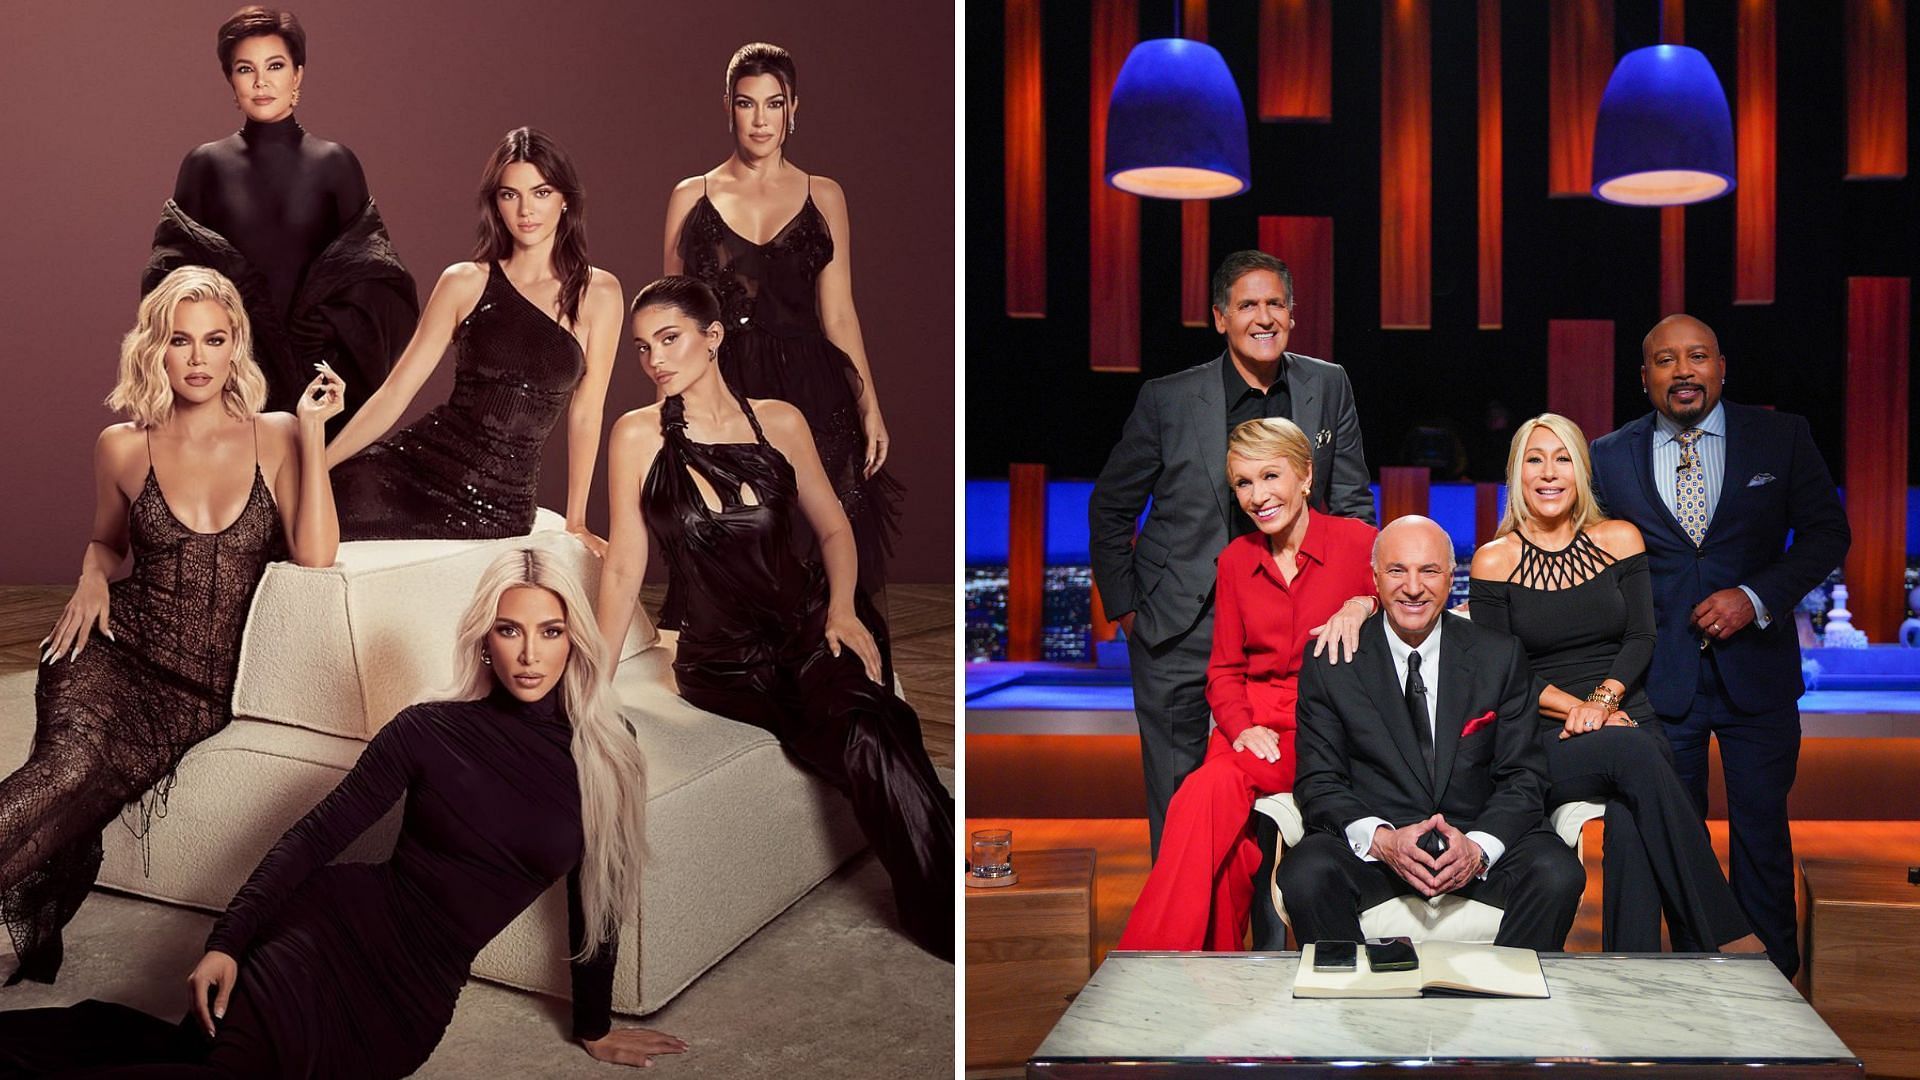 The Kardashians, Shark Tank and many other reality shows are set to begin an all new season next week